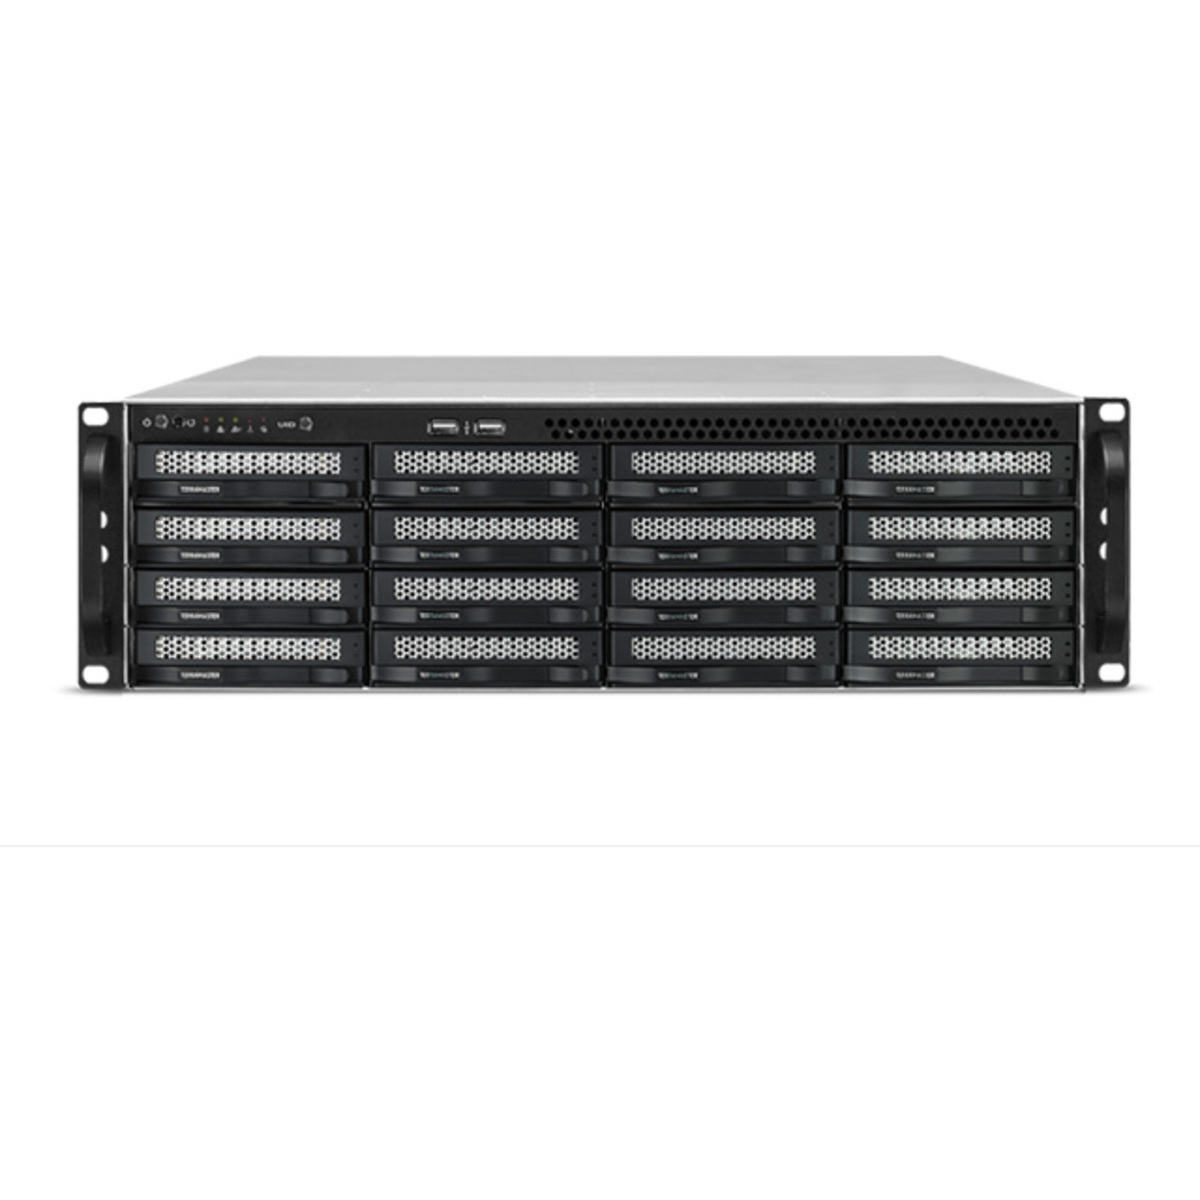 TerraMaster U16-722-2224 11tb 16-Bay RackMount Large Business / Enterprise NAS - Network Attached Storage Device 11x1tb Sandisk Ultra 3D SDSSDH3-1T00 2.5 560/520MB/s SATA 6Gb/s SSD CONSUMER Class Drives Installed - Burn-In Tested U16-722-2224